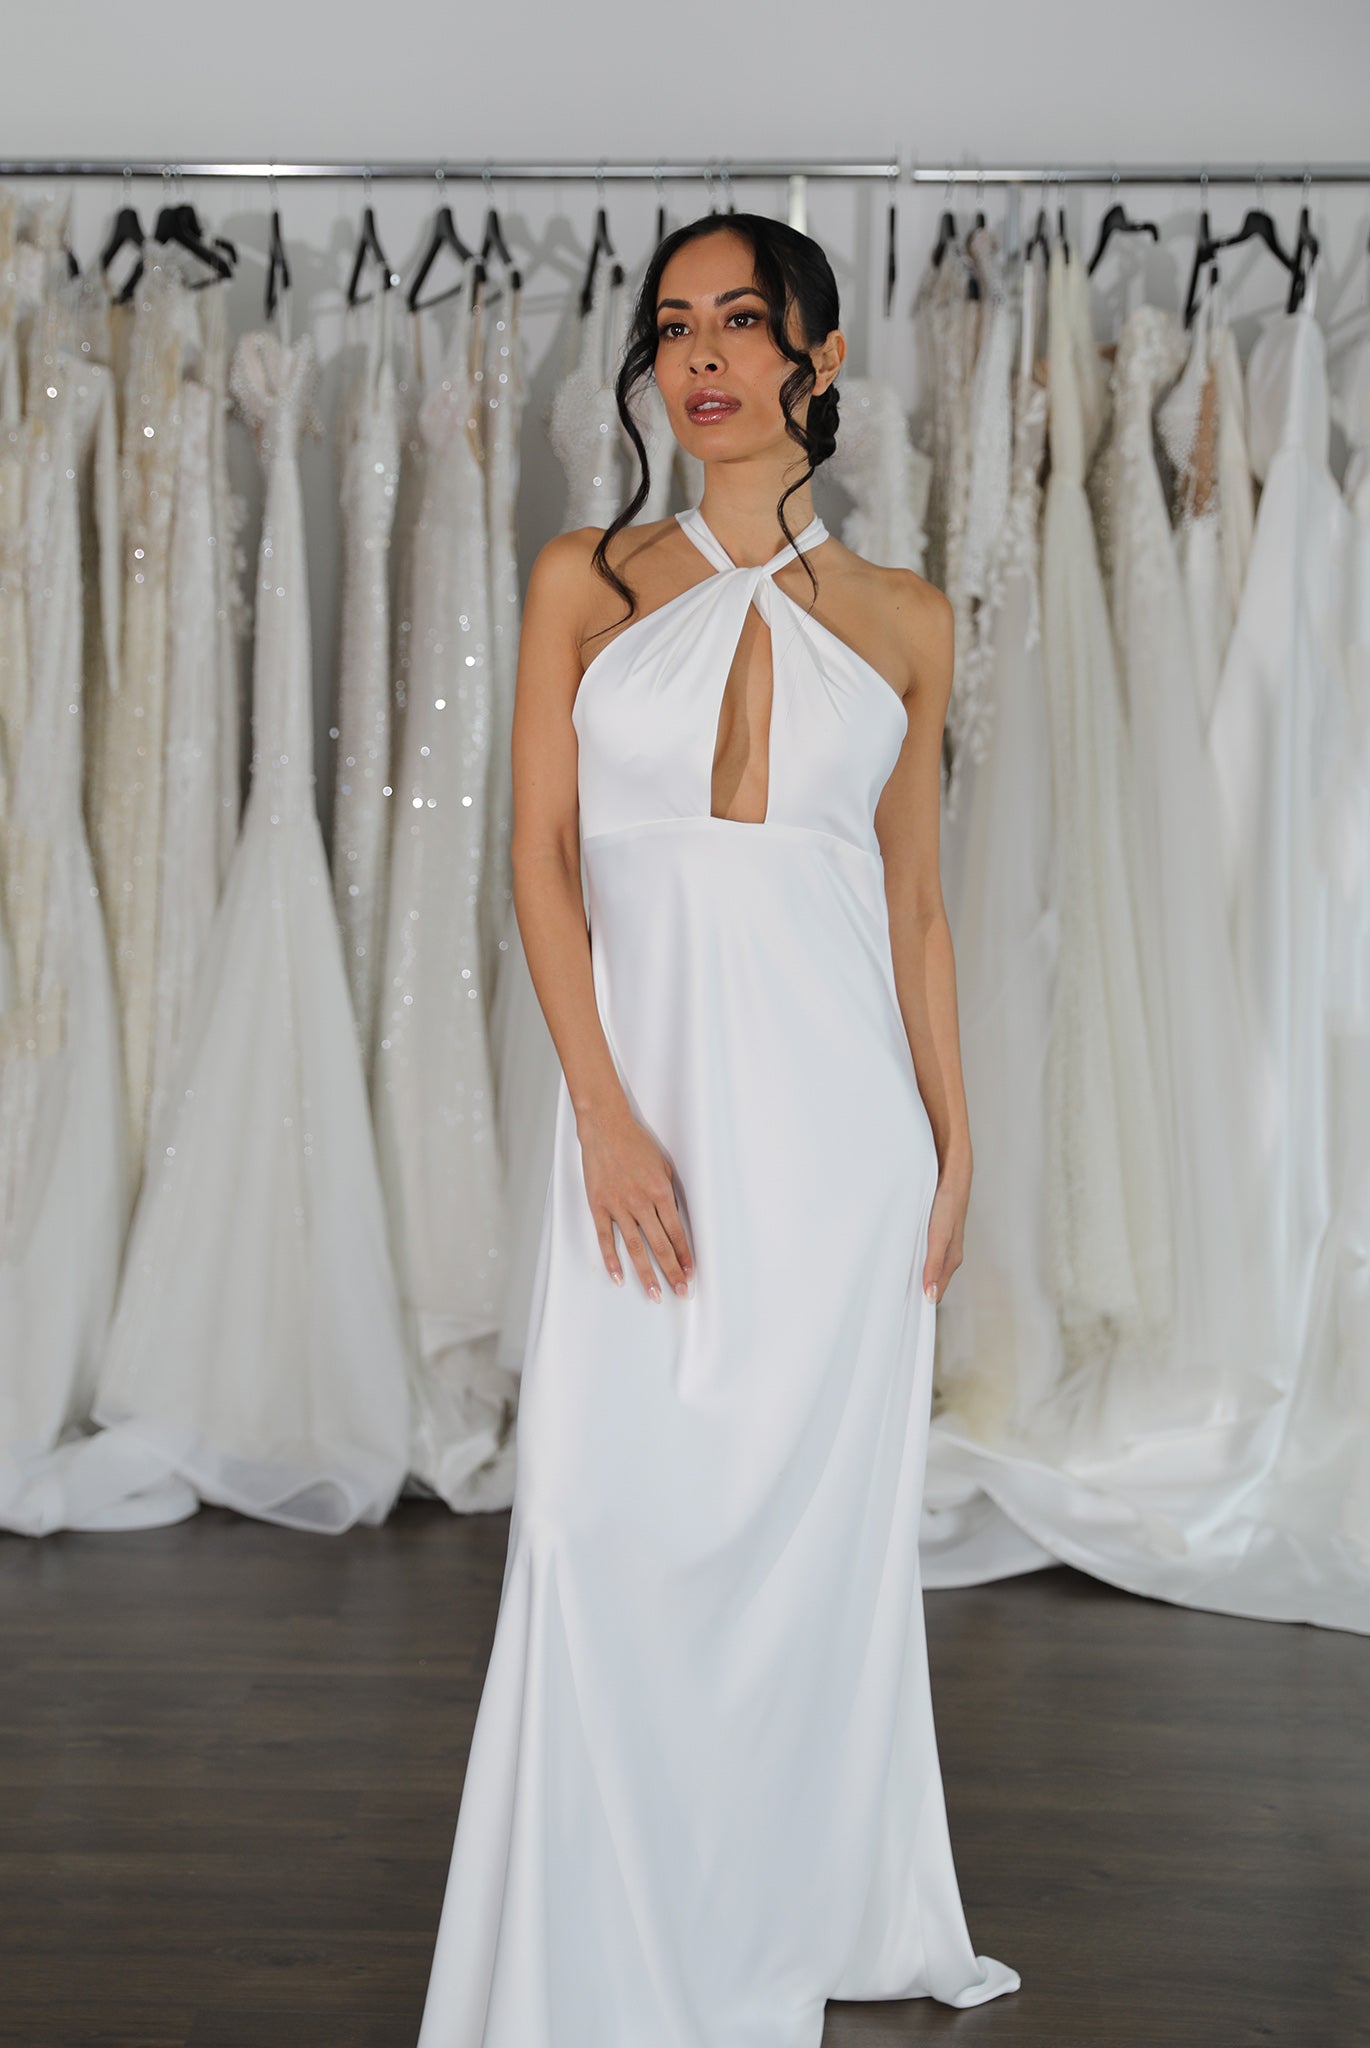 white halter neck wedding dress with chest cut out